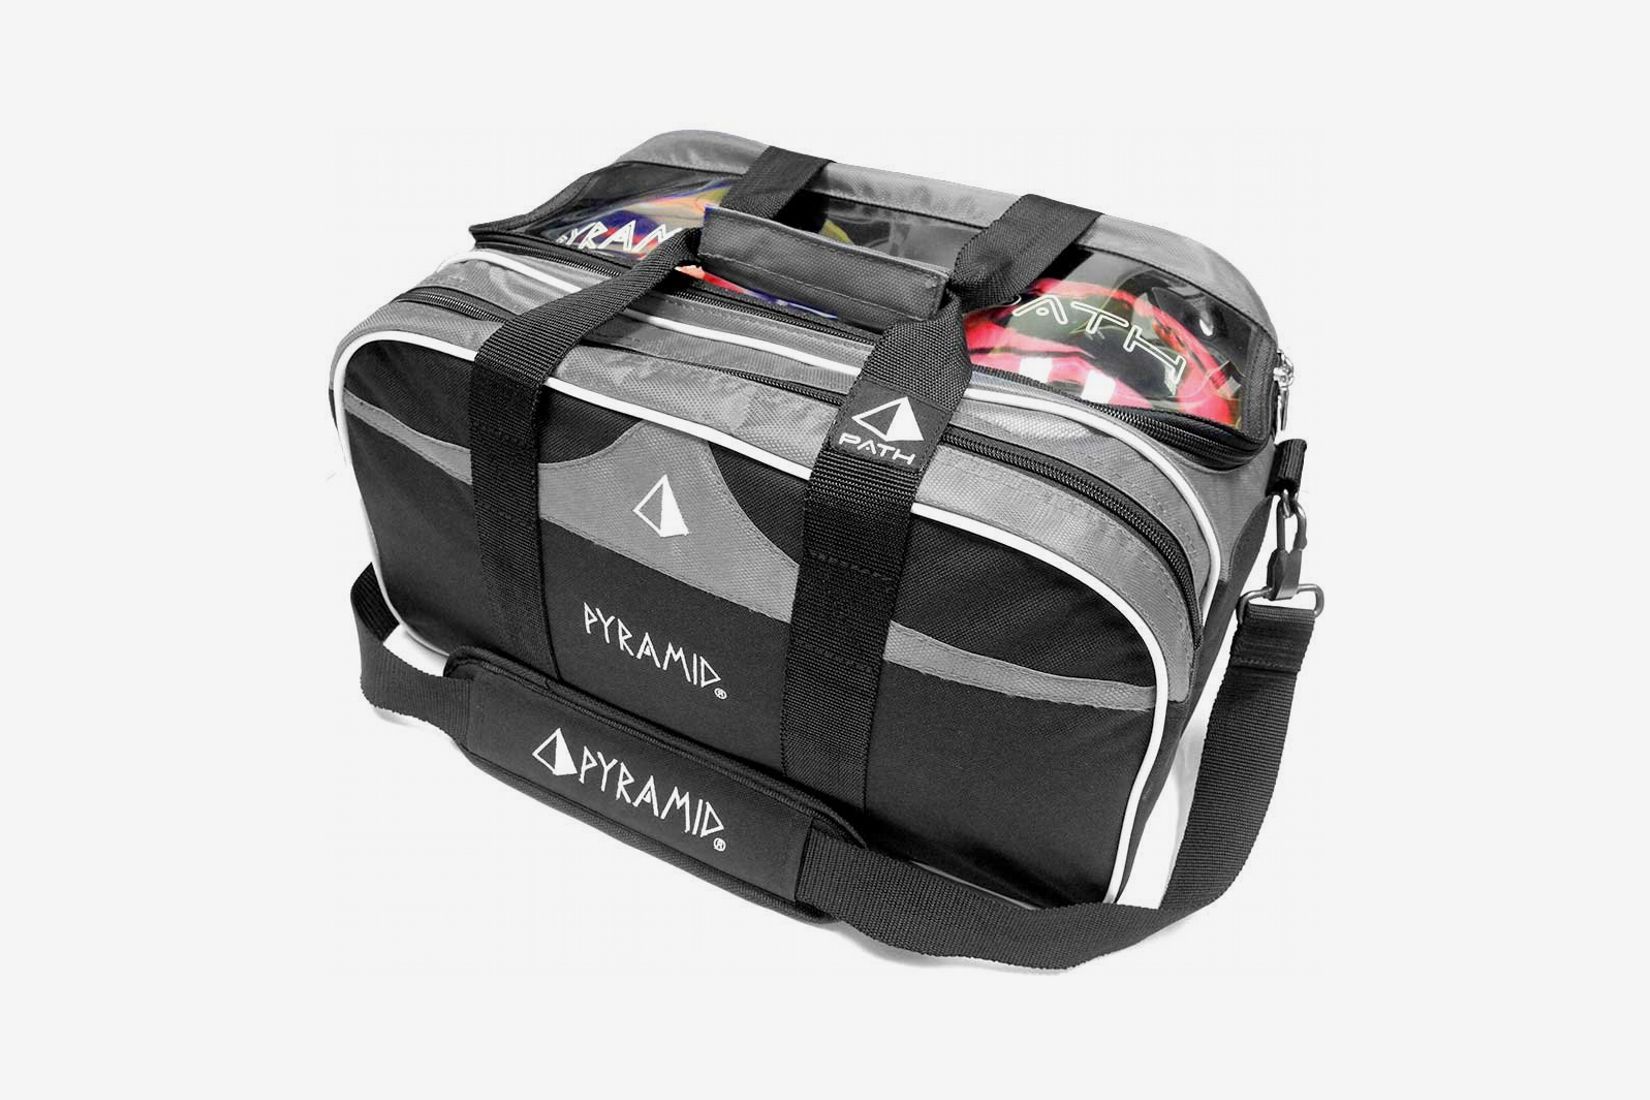 One Pair of Bowling Shoes Up to Mens 15 Shoes and Accessories Pyramid Path Pro Deluxe Single Bowling Ball Tote Bowling Bag Holds One Bowling Ball